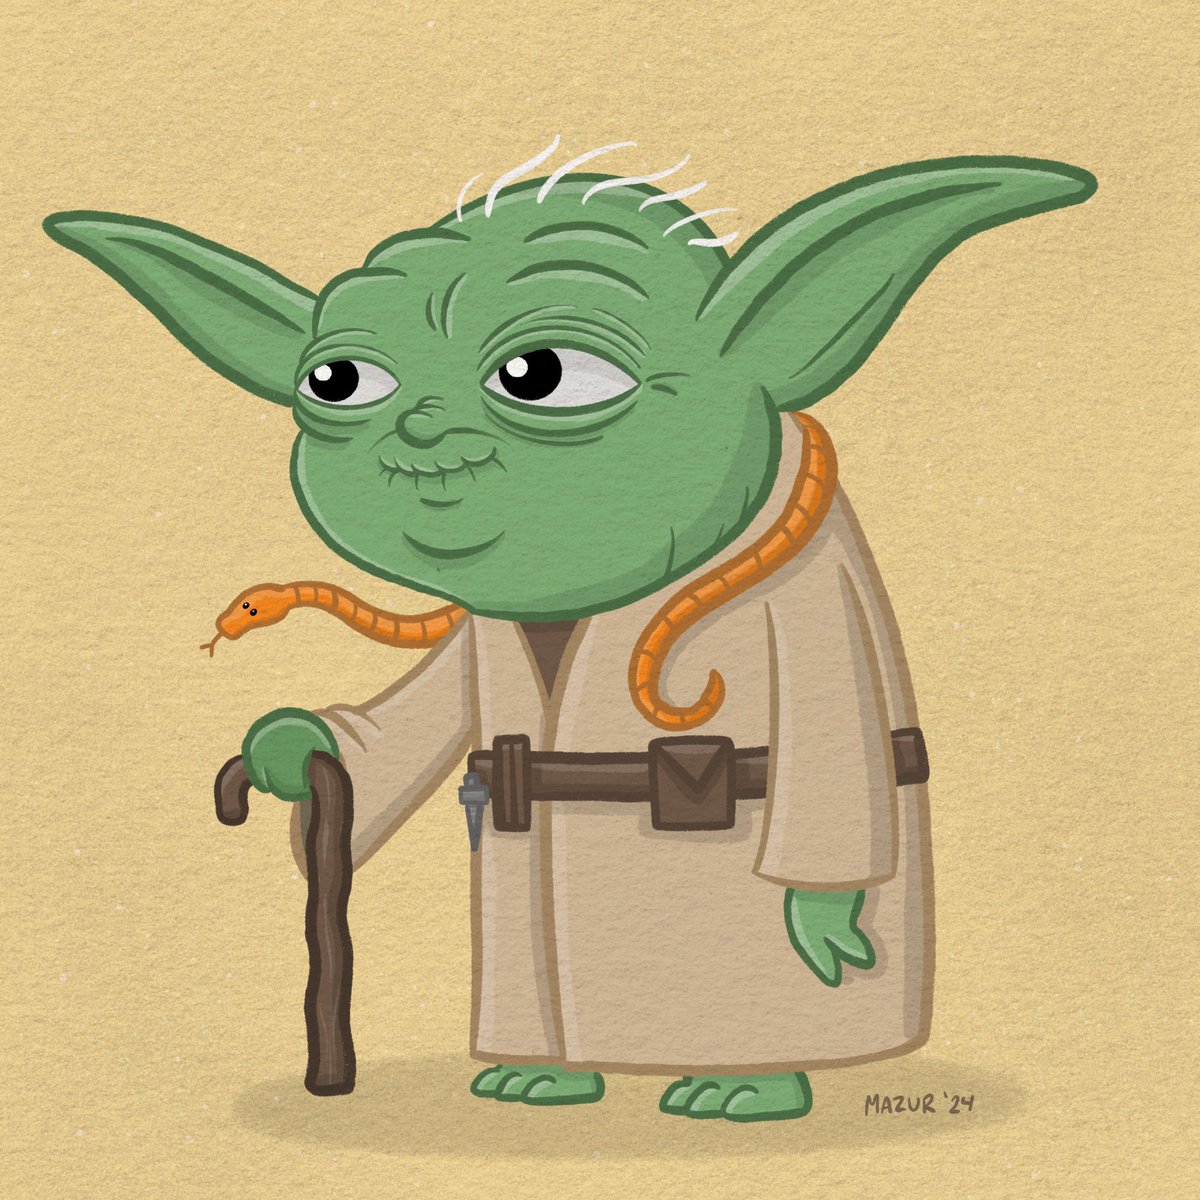 May the Fourth be with you. #maythe4thbewithyou #maytheforcebewithyou #maythefourthbewithyou #yoda #jedi #starwars #empirestrikesback #frankoz #puppet #kenner #pittsburghillustrators #digitalart #illustration #procreate #ipadpro #applepencil